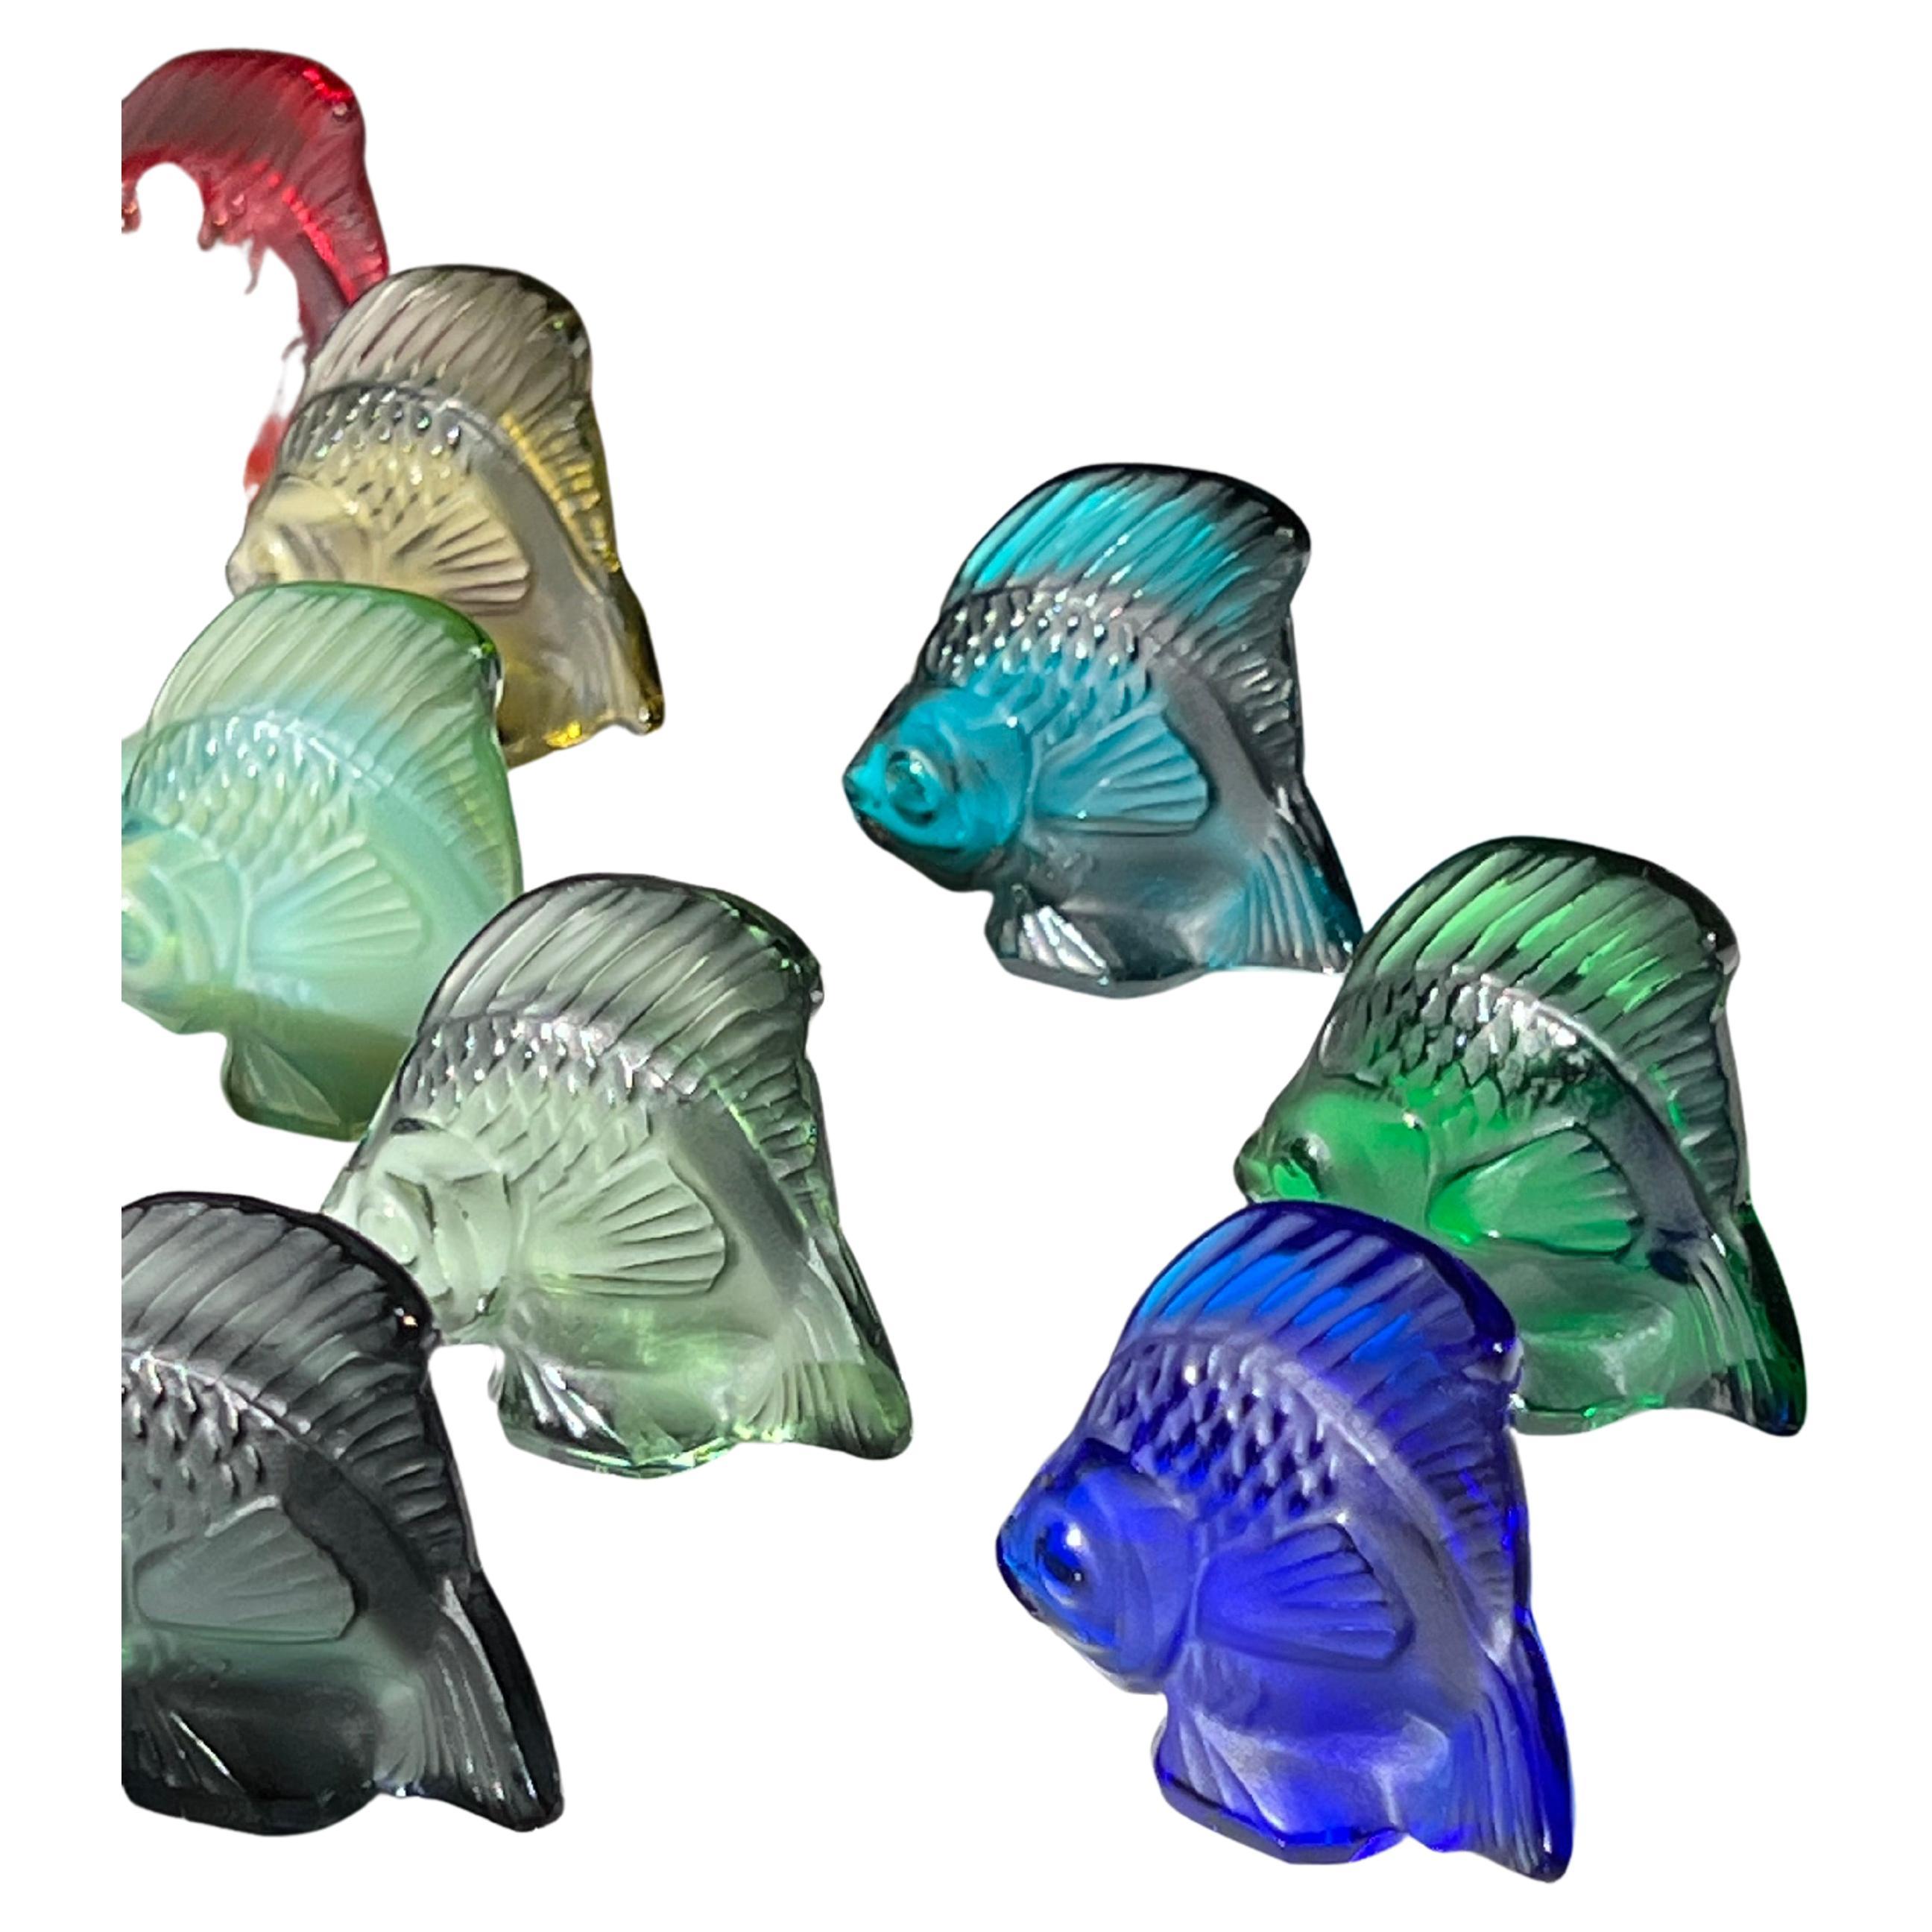 Collection of 16 Lalique Fish Sculptures in Glass
The original Fish in glass was designed in 1913 by René Lalique and since become an important and iconic piece in the Lalique collection. It is now issued in a wide range of colors.

Lalique is a